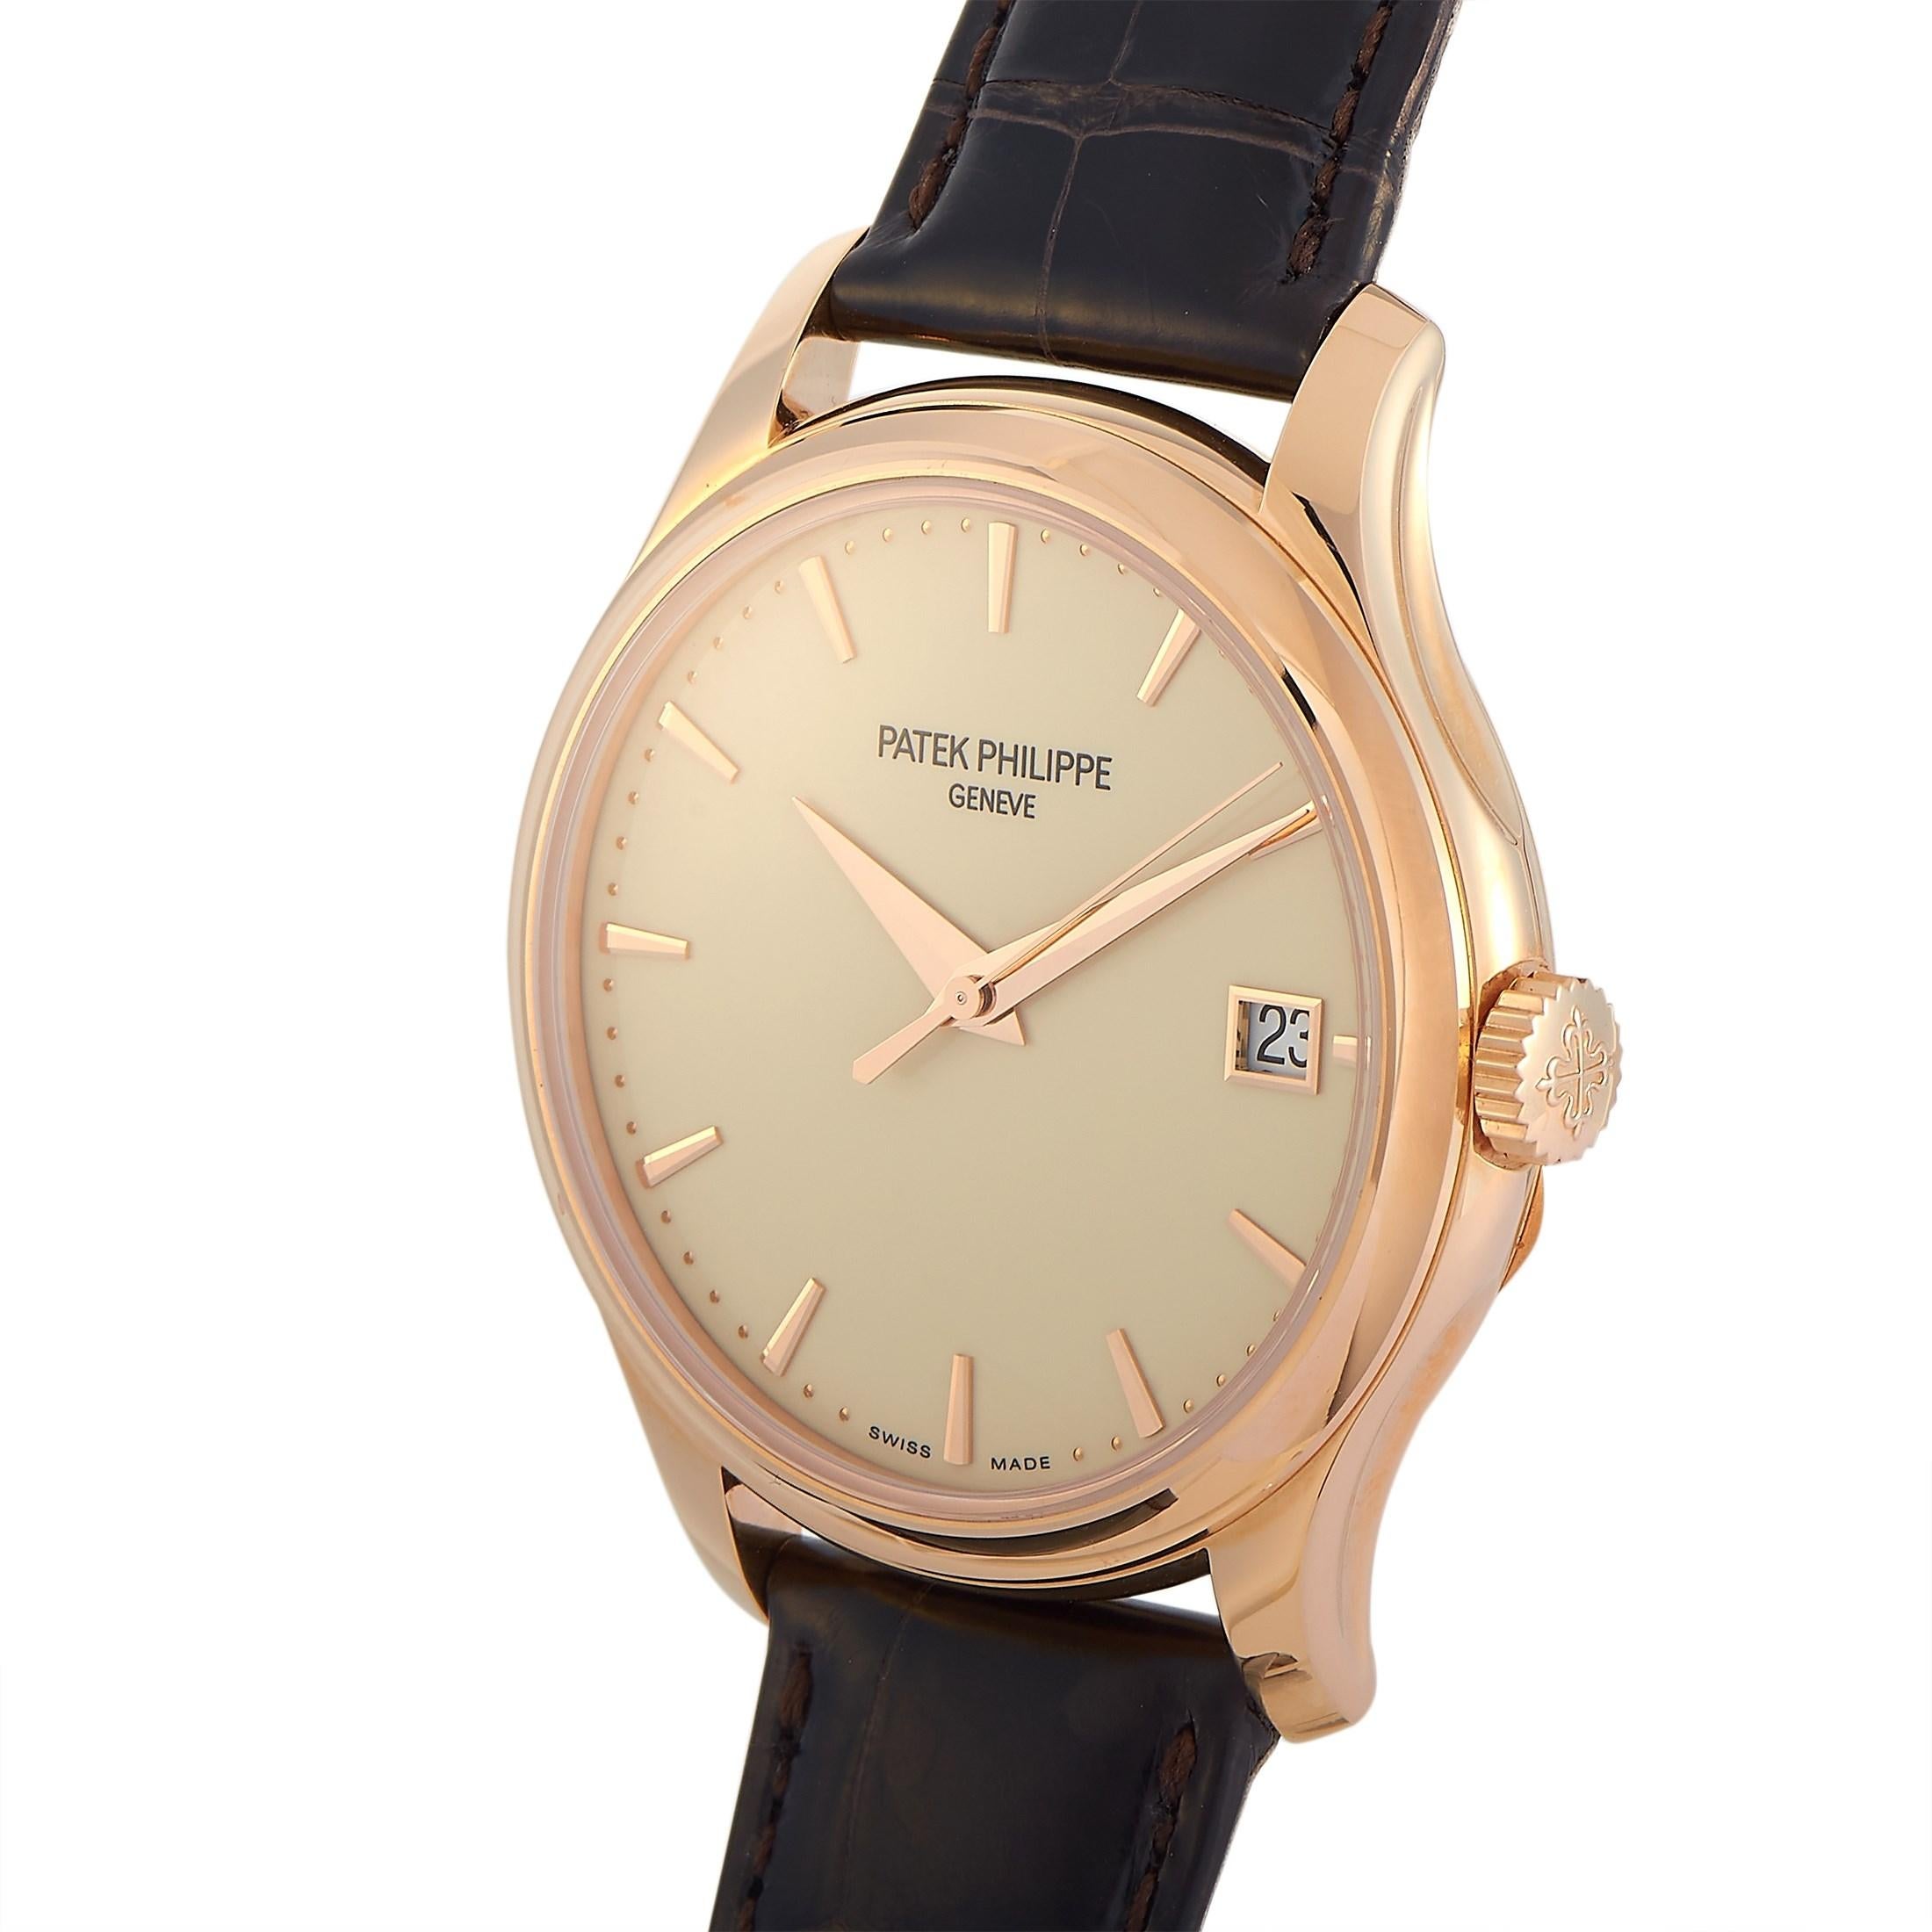 The Patek Philippe Calatrava Watch, reference number 5227R-001, boasts a crisp, classic sense of style that will always be relevant. 

An opulent 39mm case crafted from 18K Rose Gold is just the beginning when it comes to this opulent design. The